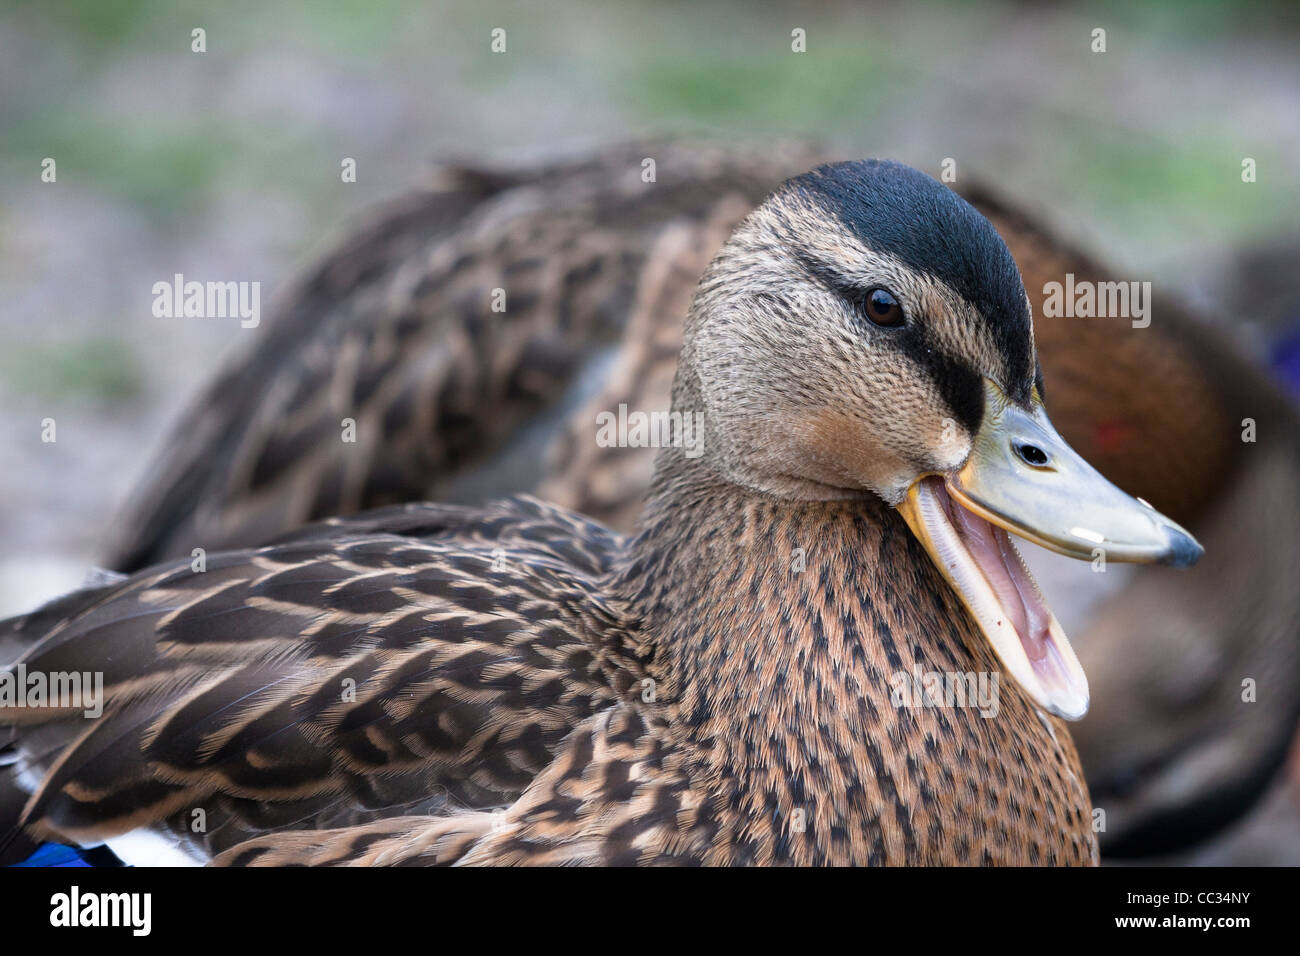 A comical close-up of a single adult female mallard duck calling or quacking. Stock Photo